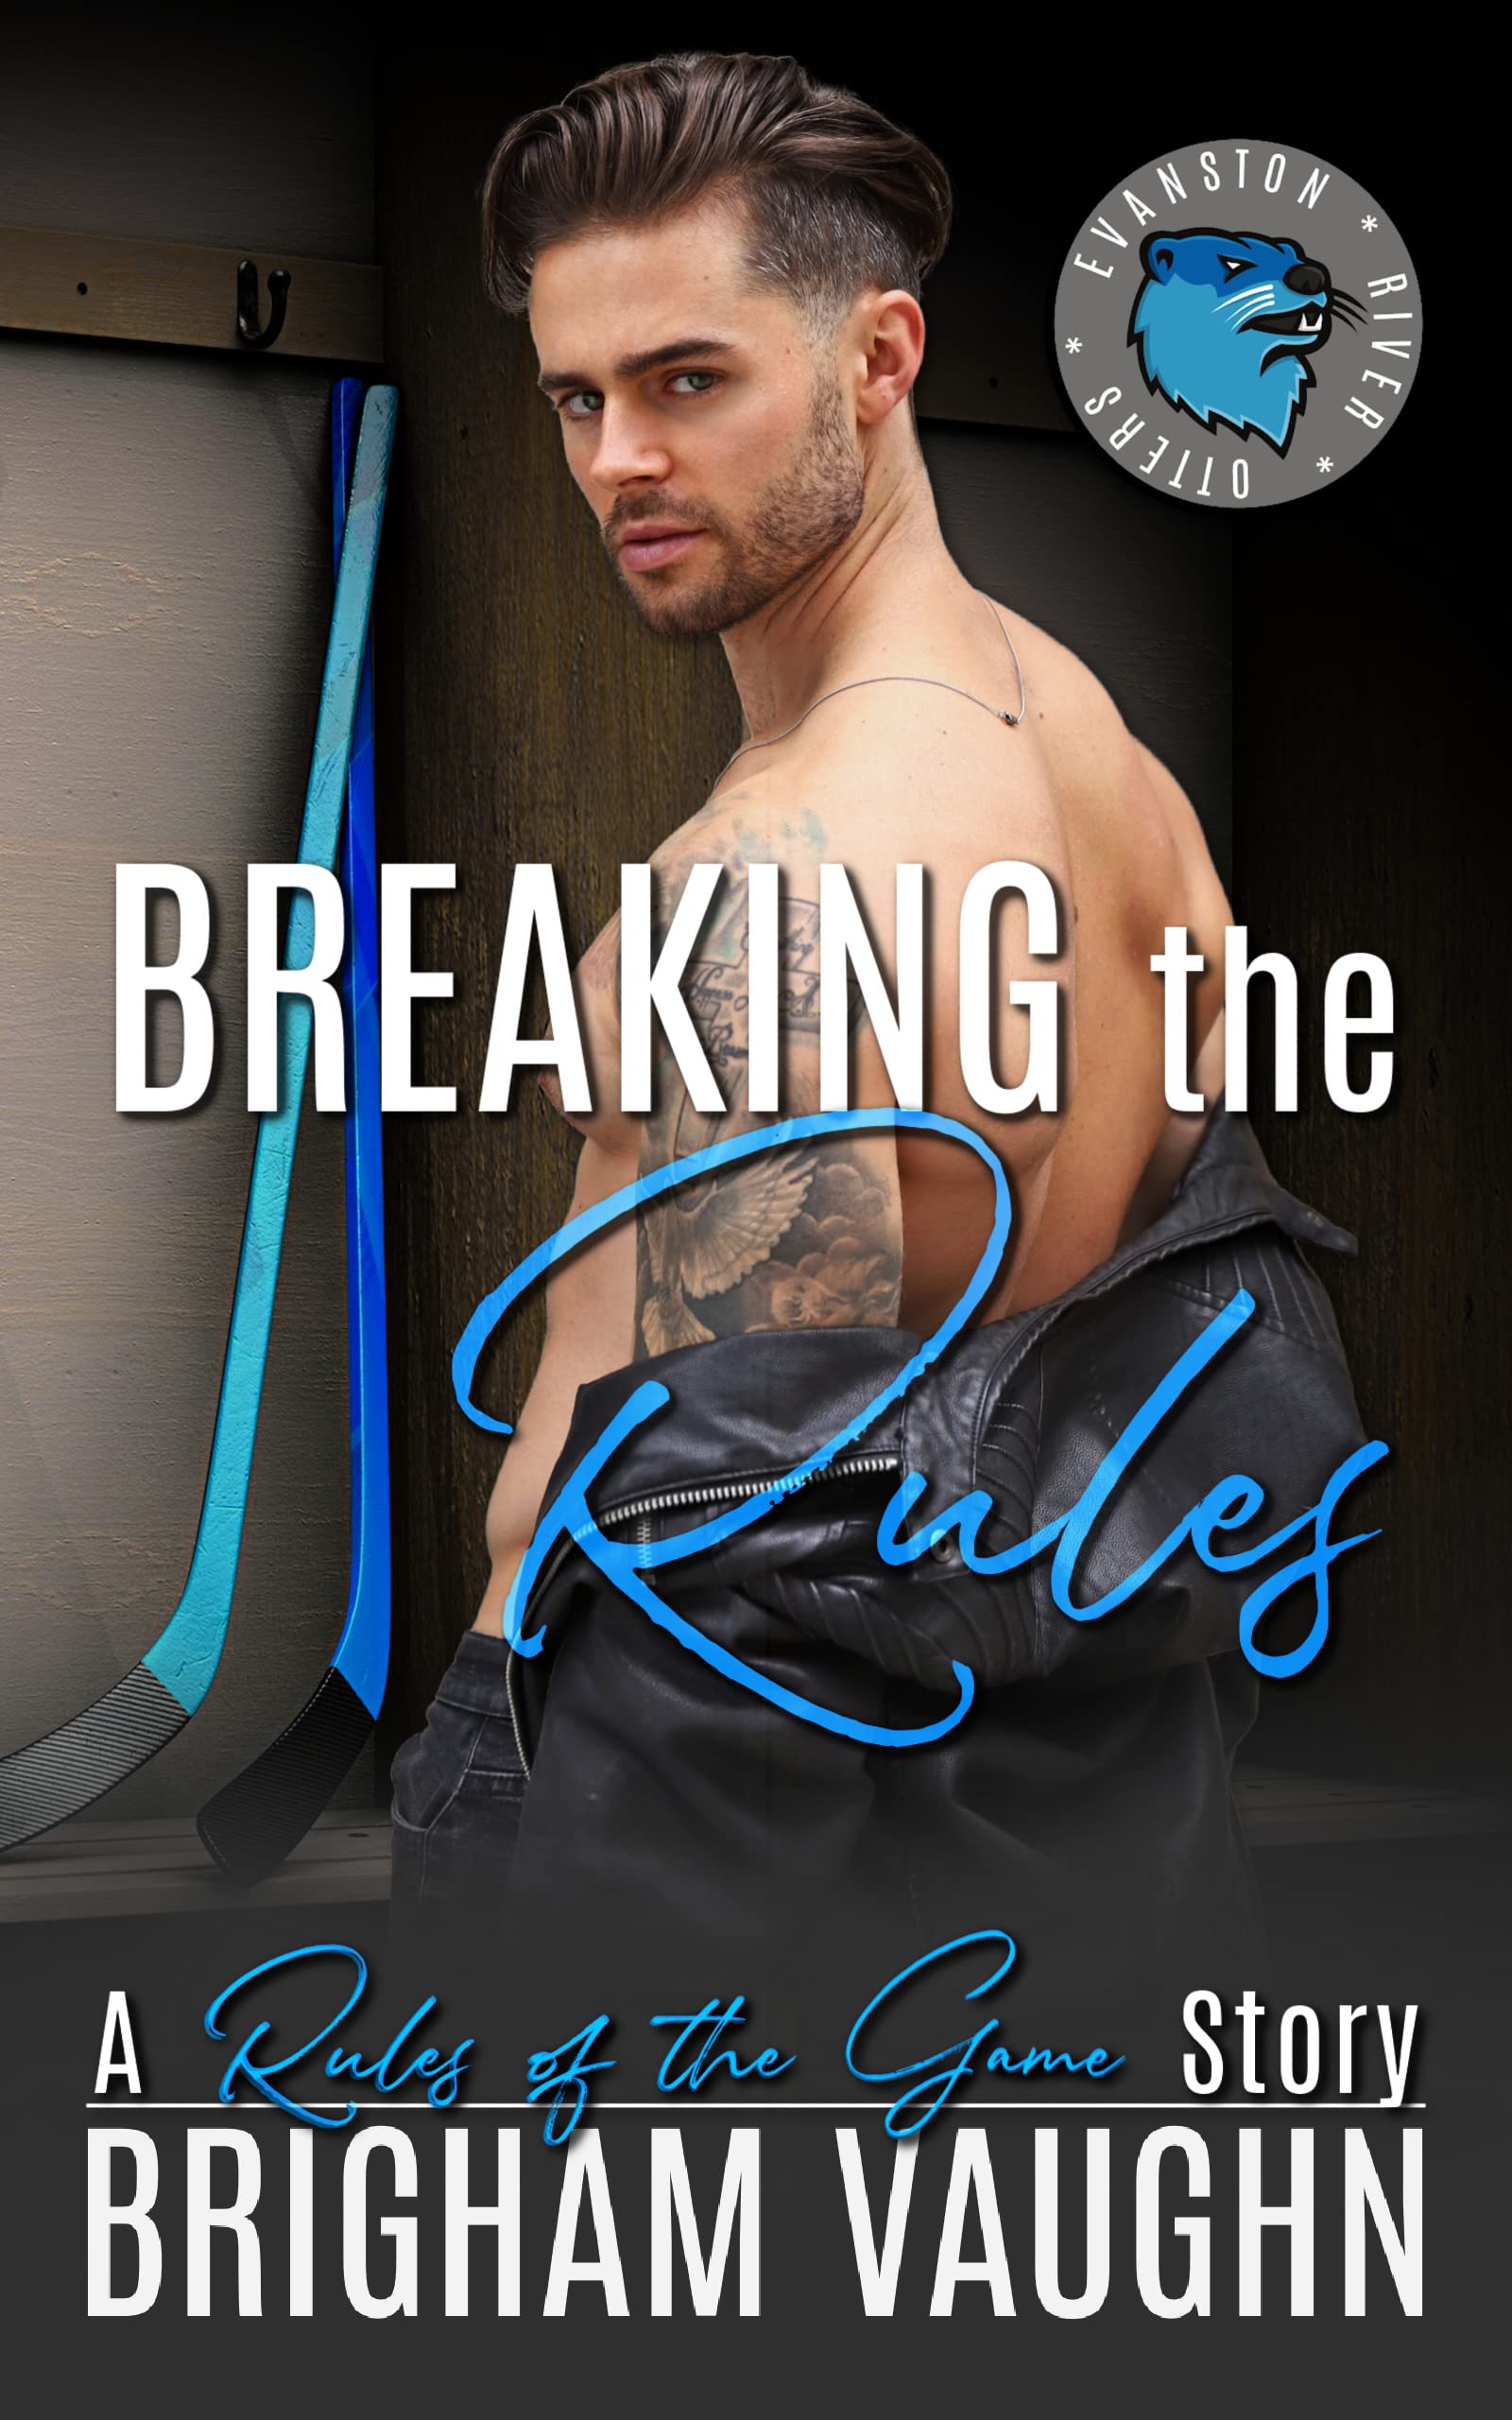 Breaking the Rules by Brigham Vaughn PDF Download